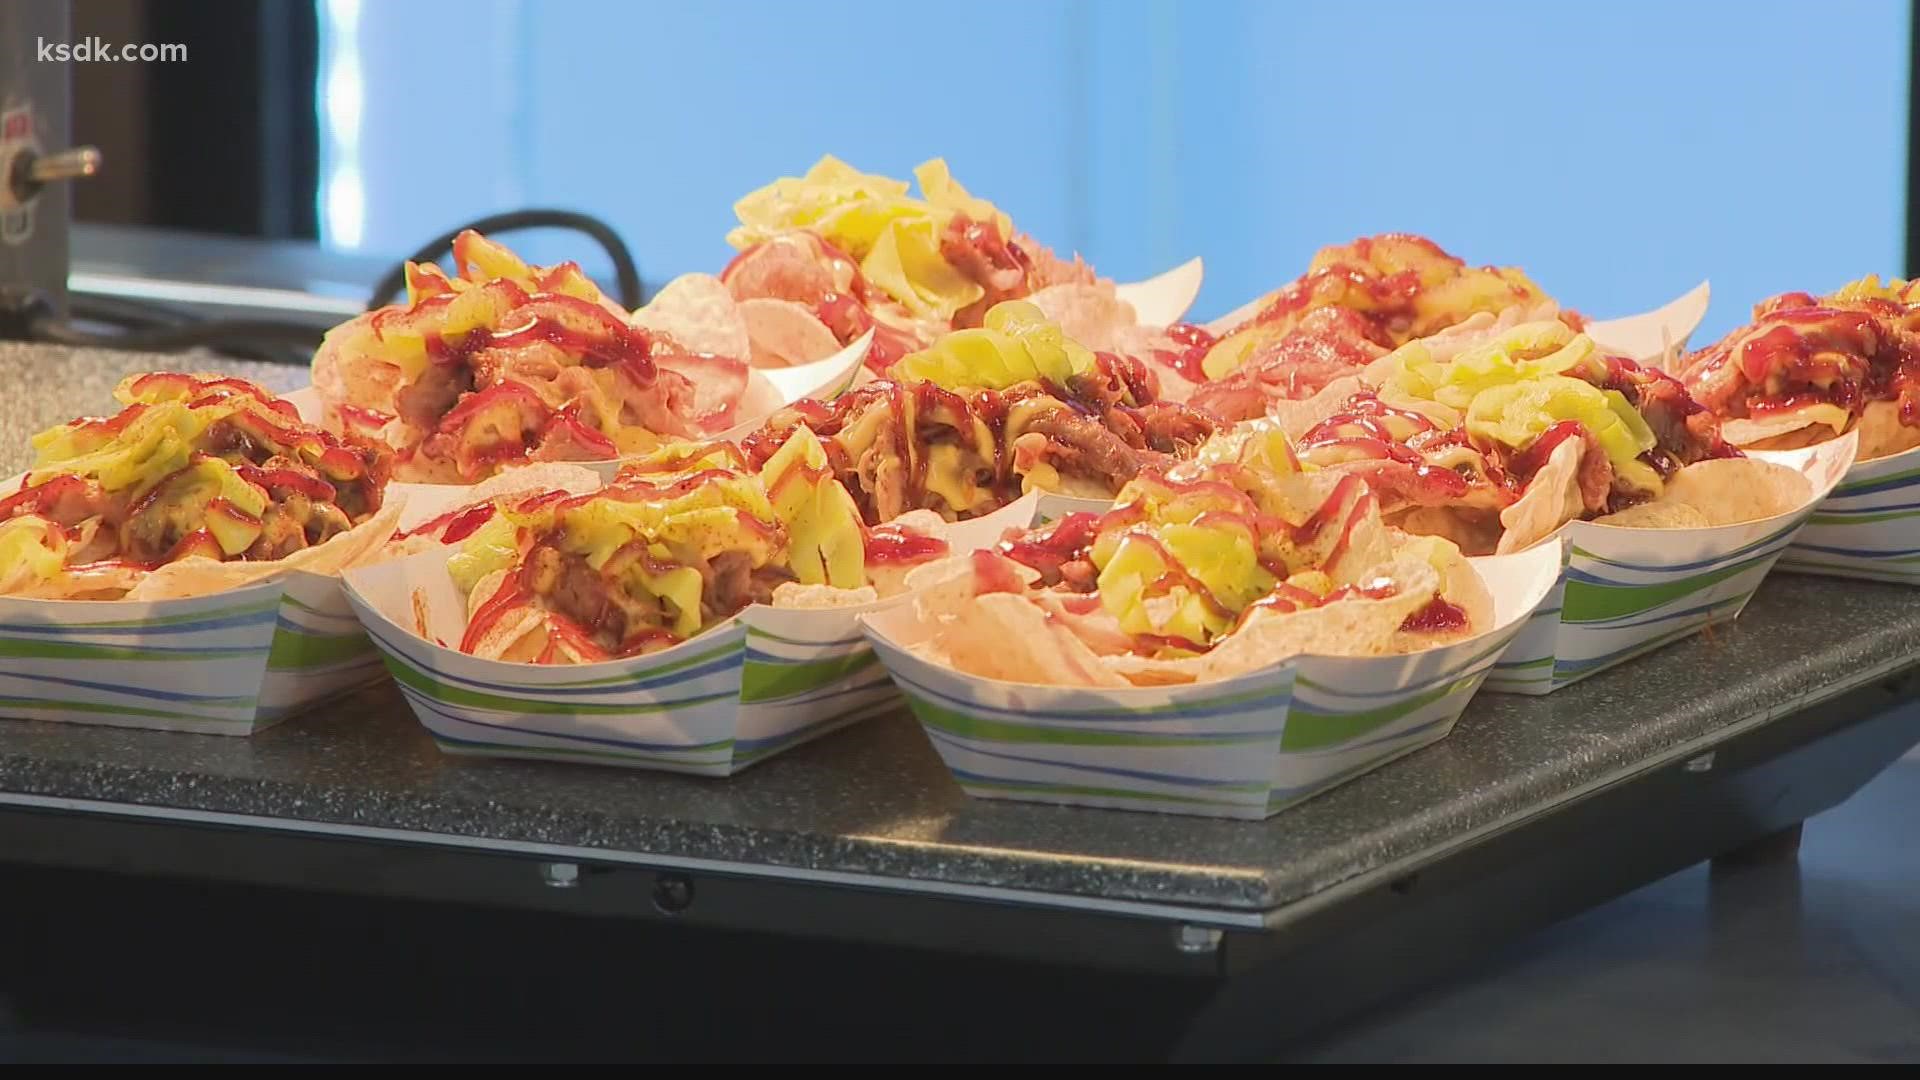 New Busch Stadium food options for 2022